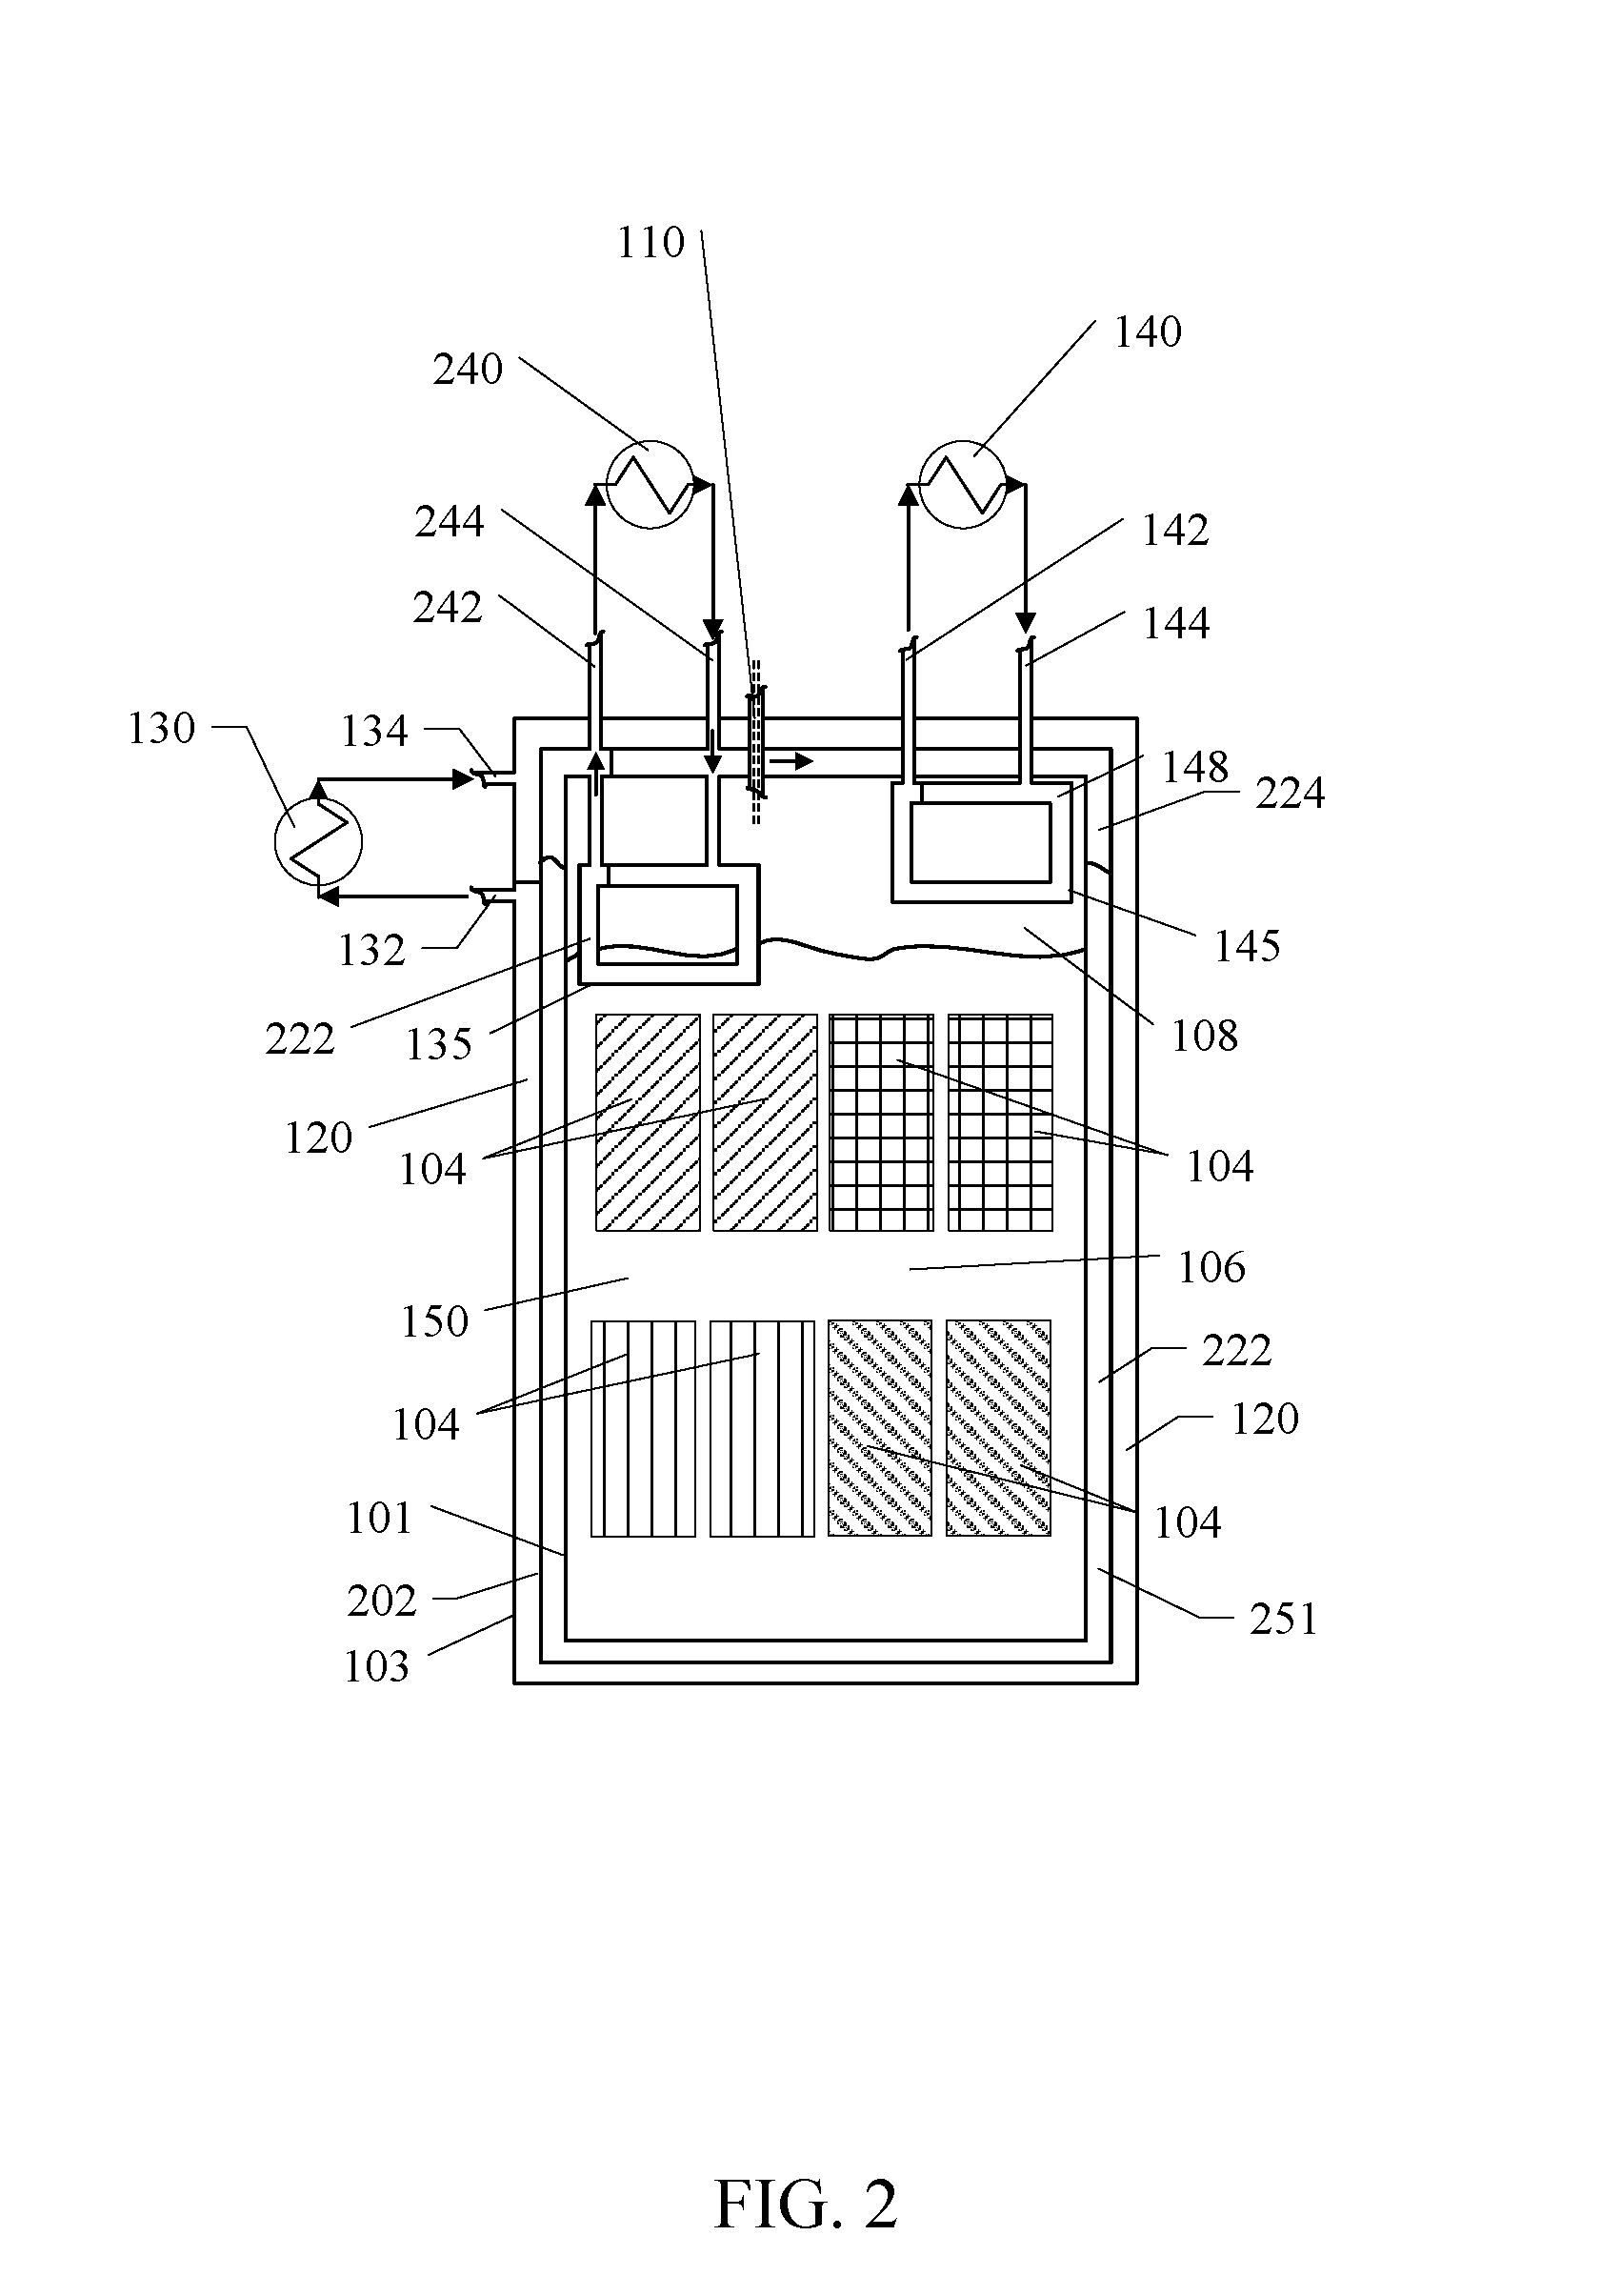 System and method for fluid cooling of electronic devices installed in a sealed enclosure